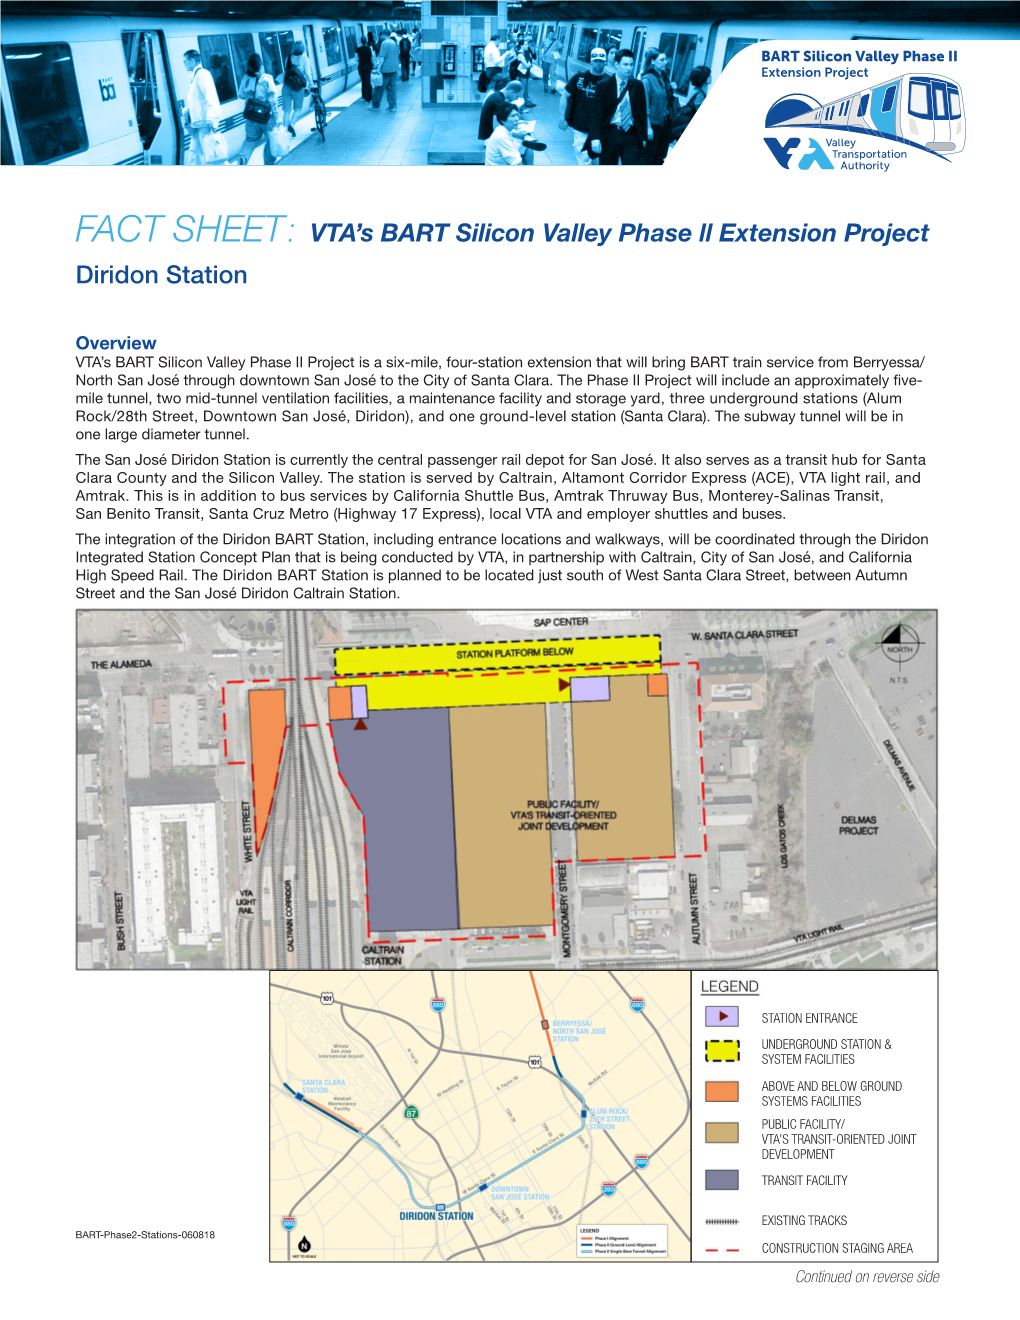 Diridon Station FACT SHEET: VTA's BART Silicon Valley Phase Ll Extension Project